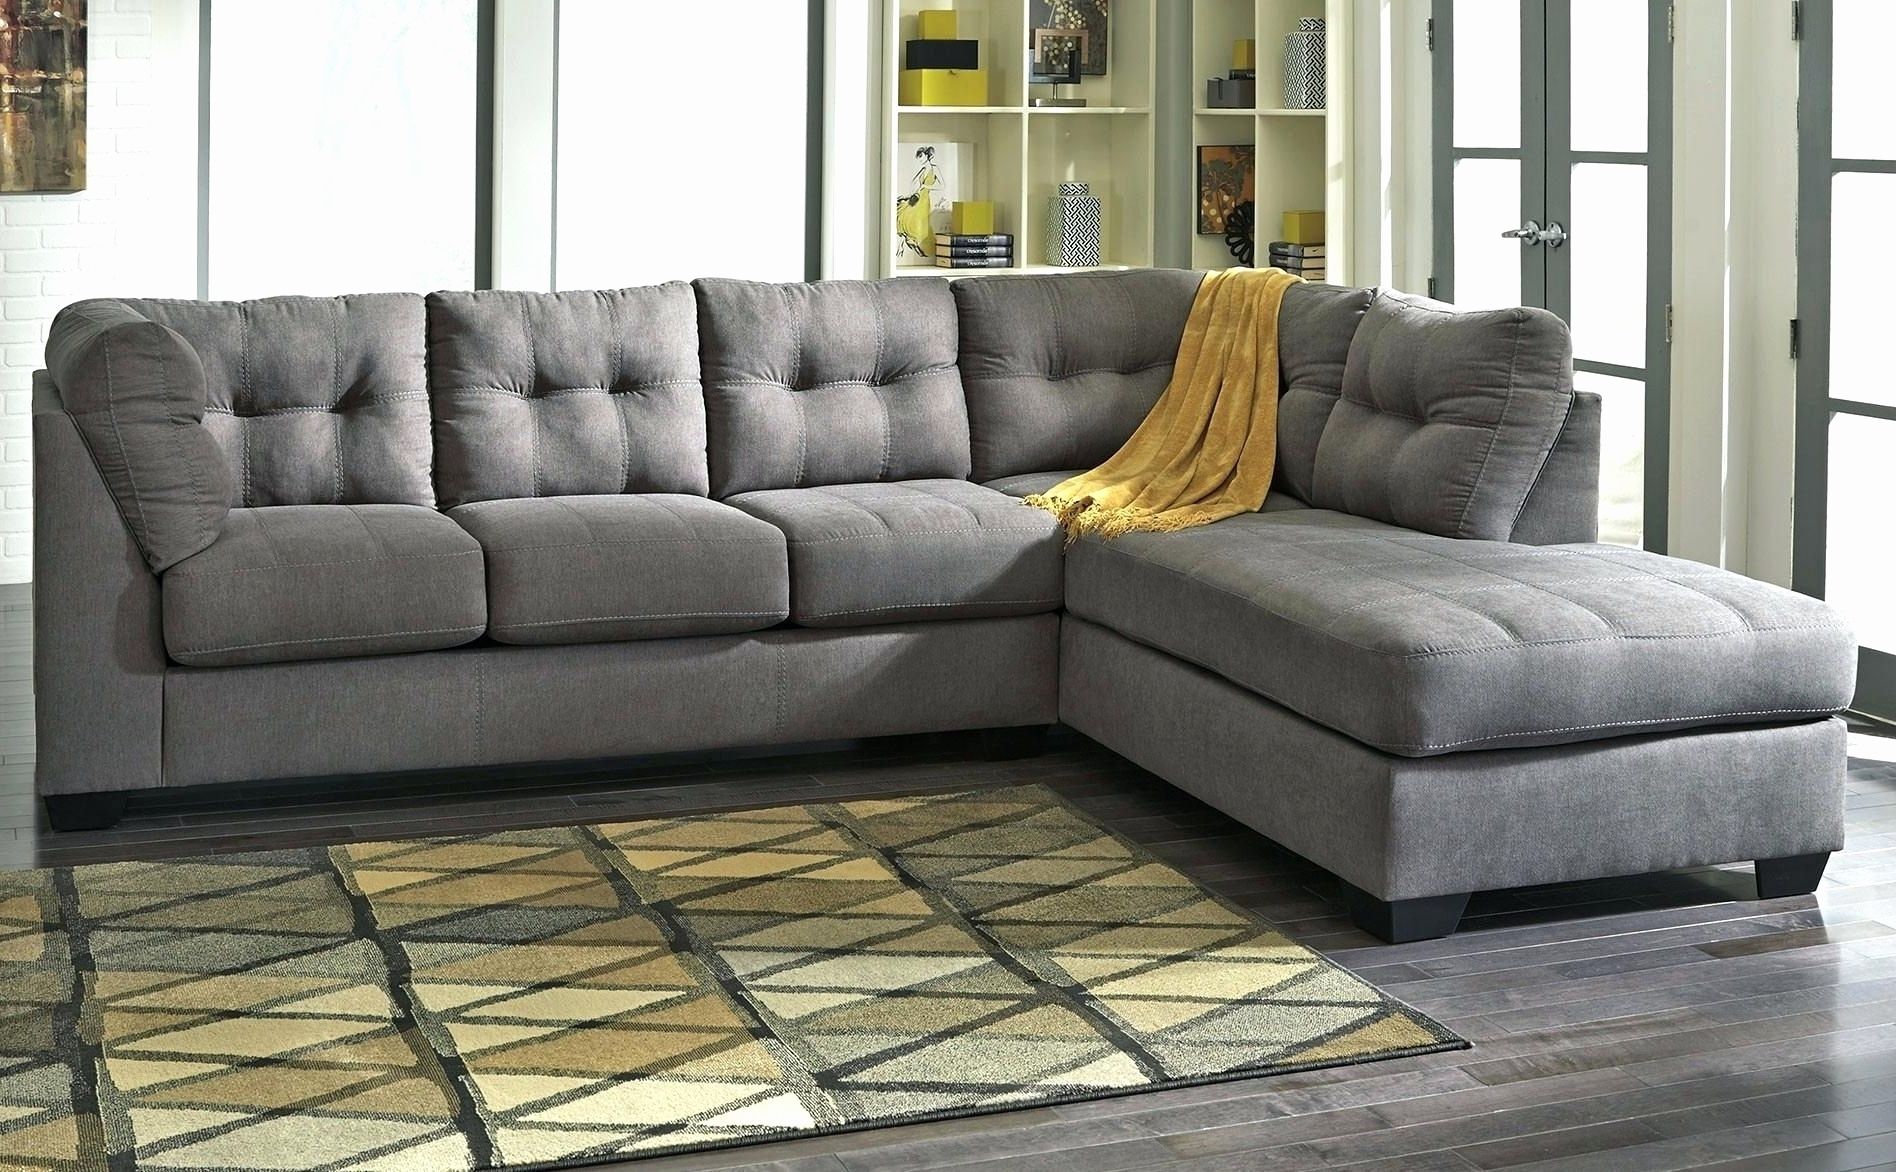 Widely Used Fresh Grey Velvet Sectional Sofa 2018 – Couches And Sofas Ideas With Regard To Tufted Sectional Sofas With Chaise (View 9 of 15)